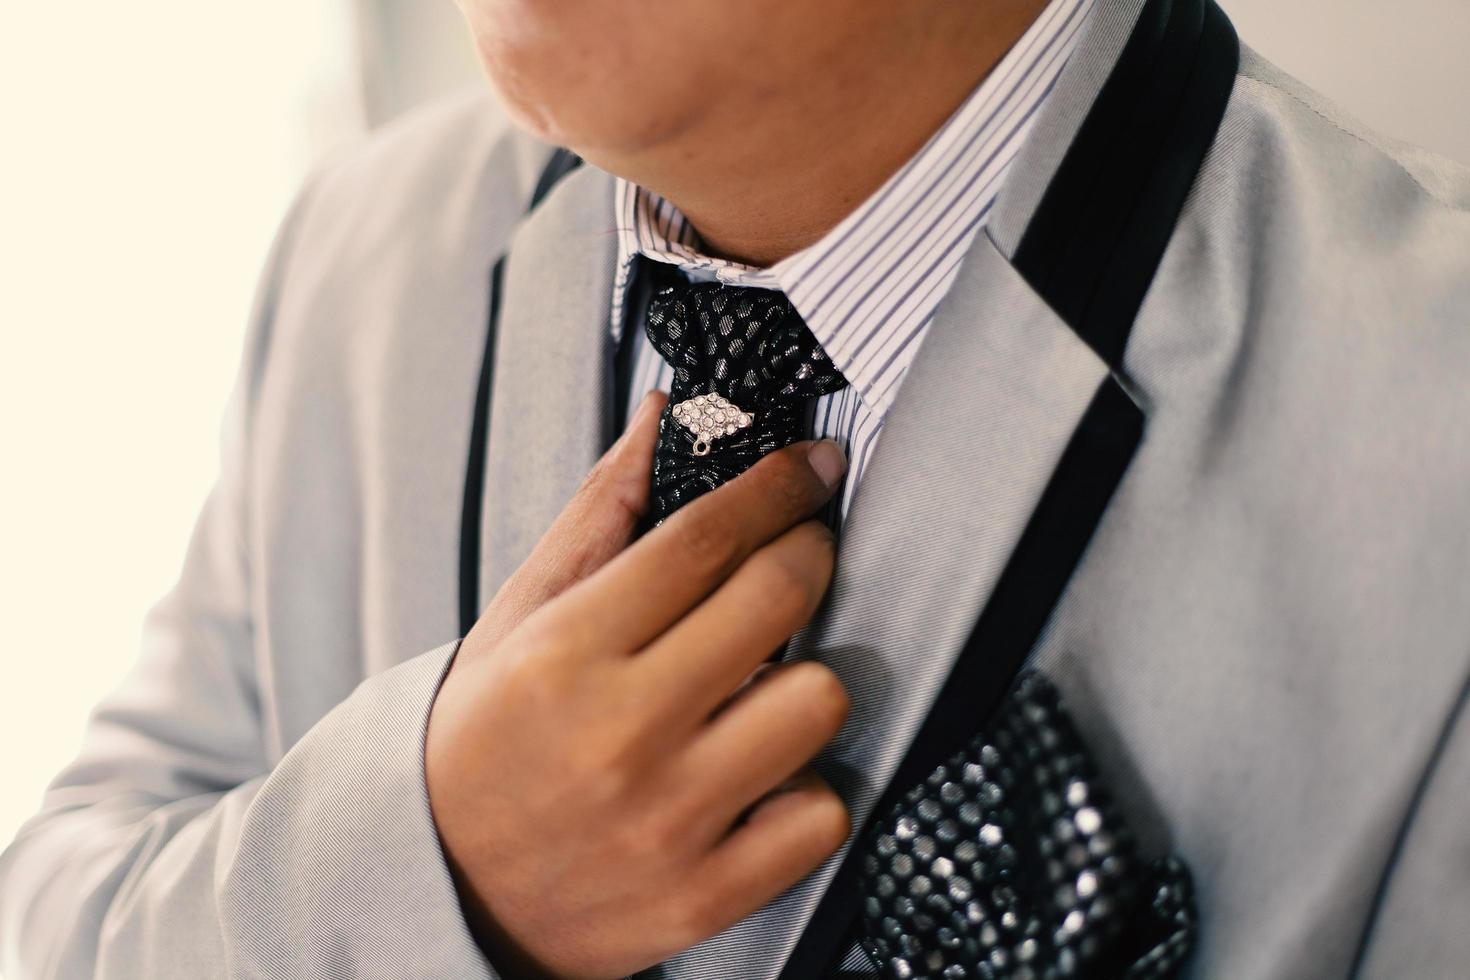 The groom tightens his cufflinks before the wedding photo